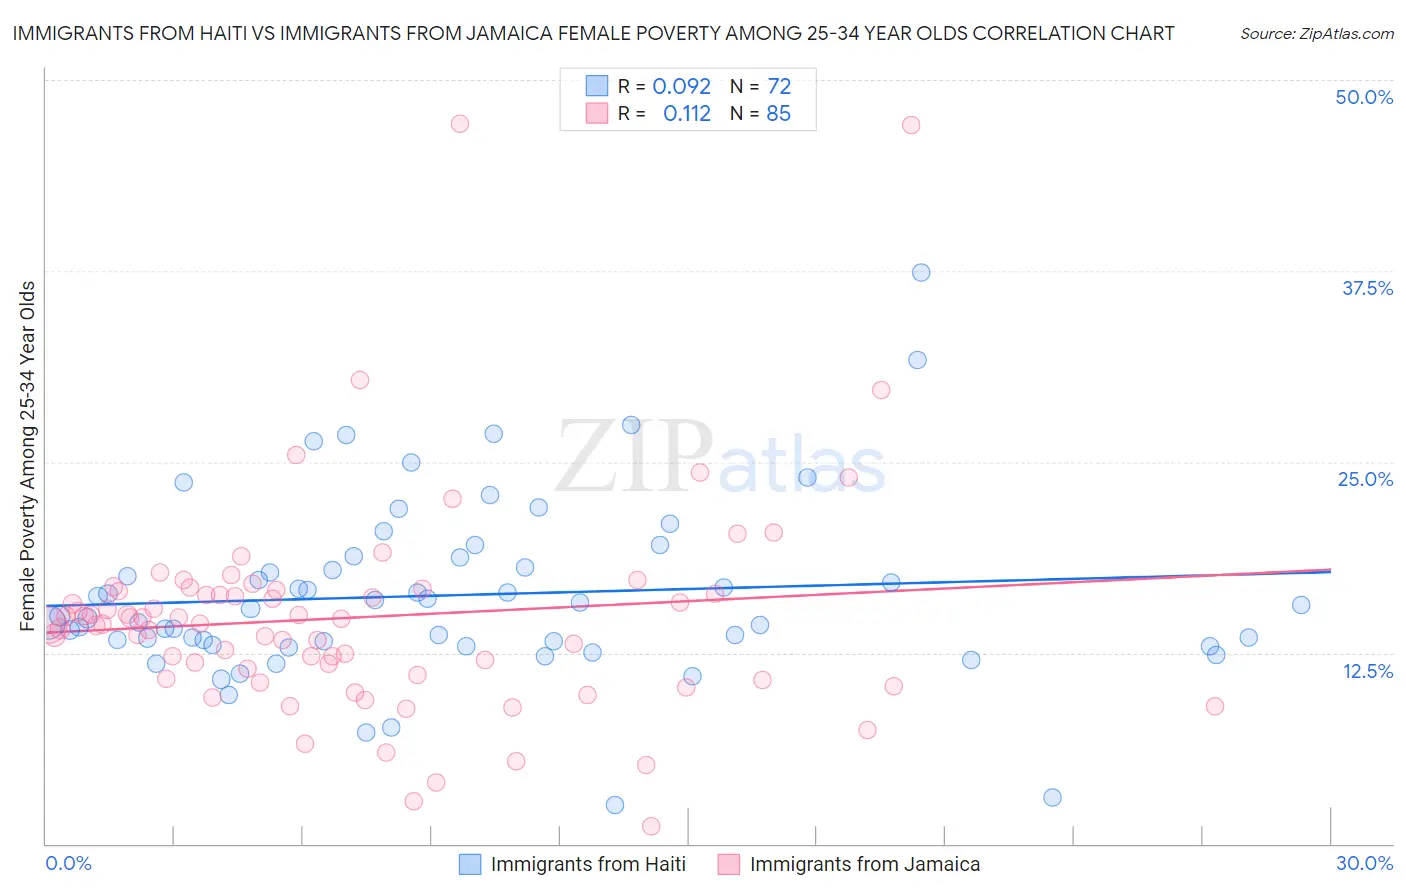 Immigrants from Haiti vs Immigrants from Jamaica Female Poverty Among 25-34 Year Olds